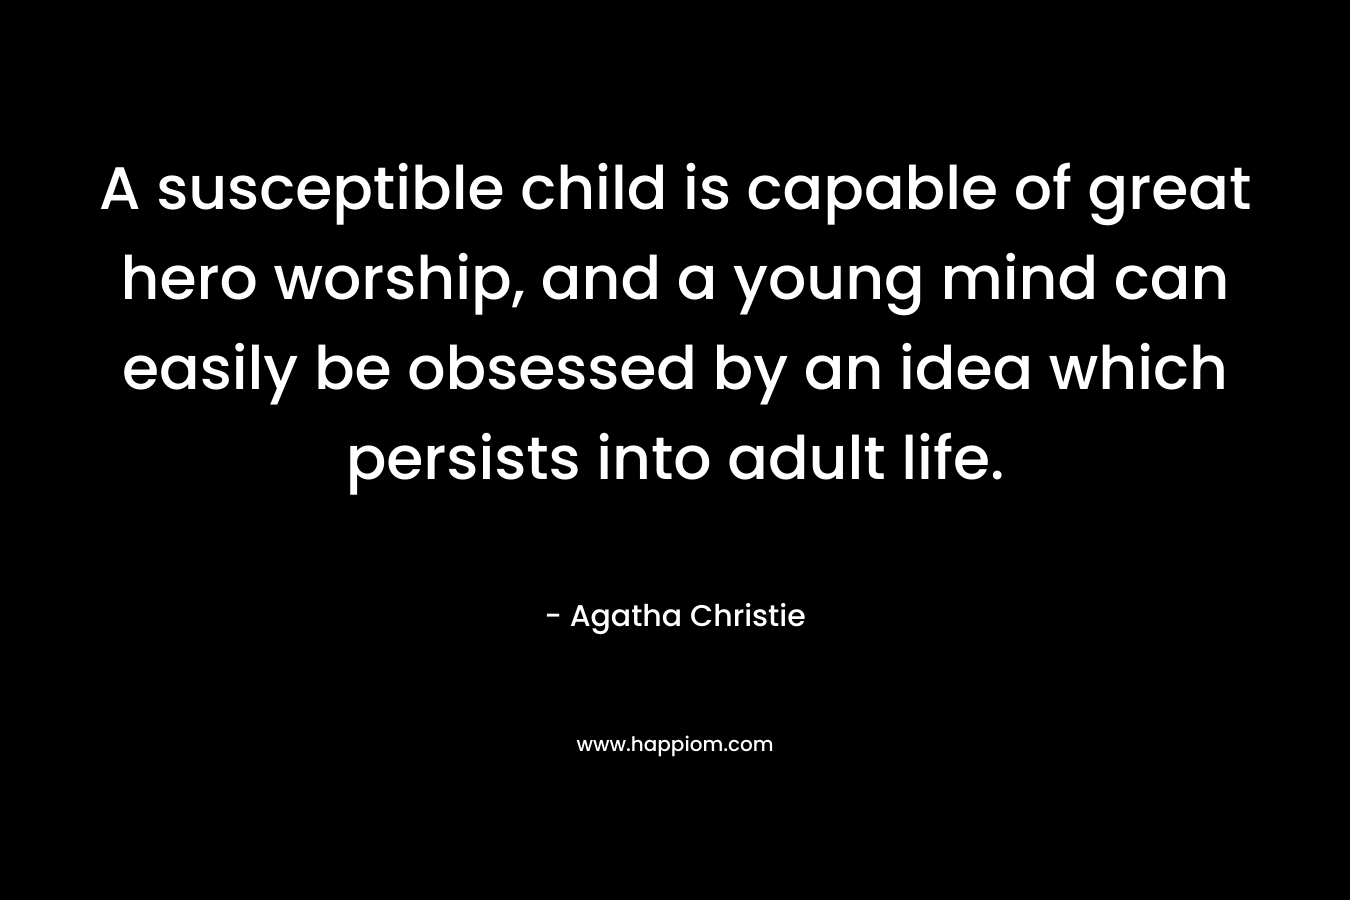 A susceptible child is capable of great hero worship, and a young mind can easily be obsessed by an idea which persists into adult life. – Agatha Christie